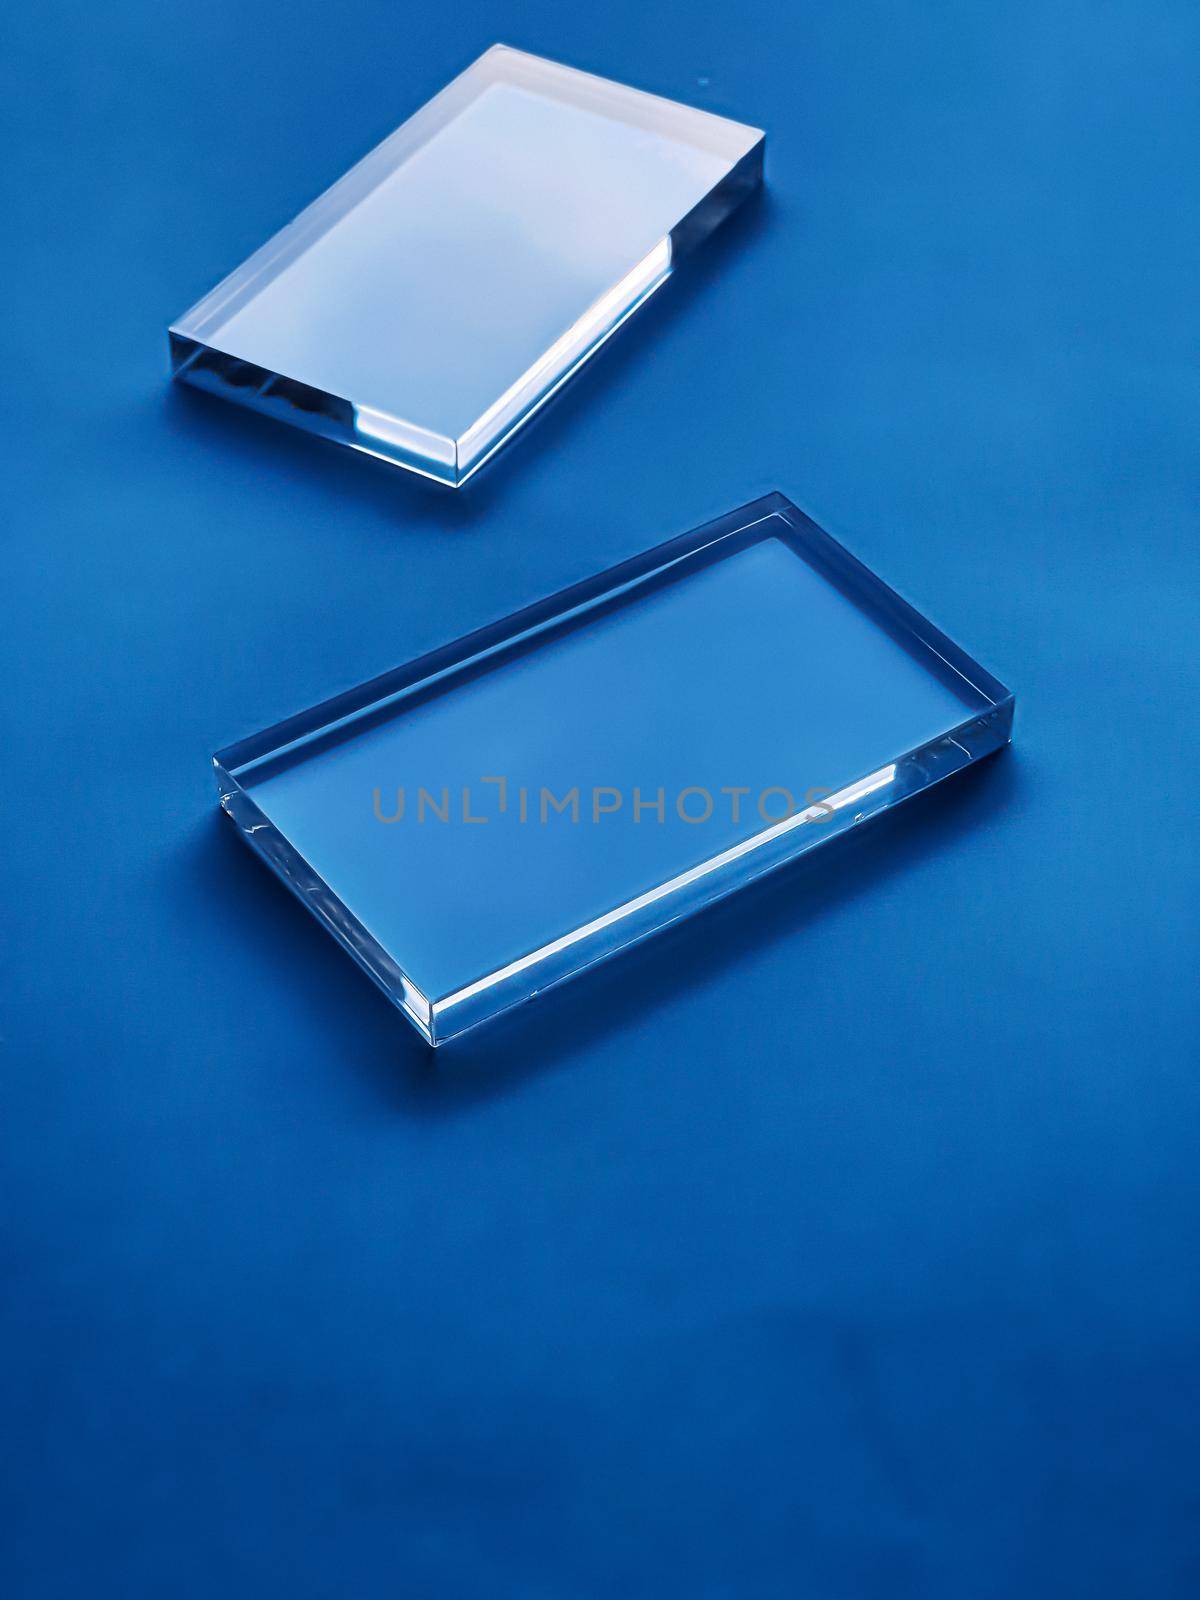 Transparent glass device on blue background, future technology and abstract screen mockup design by Anneleven